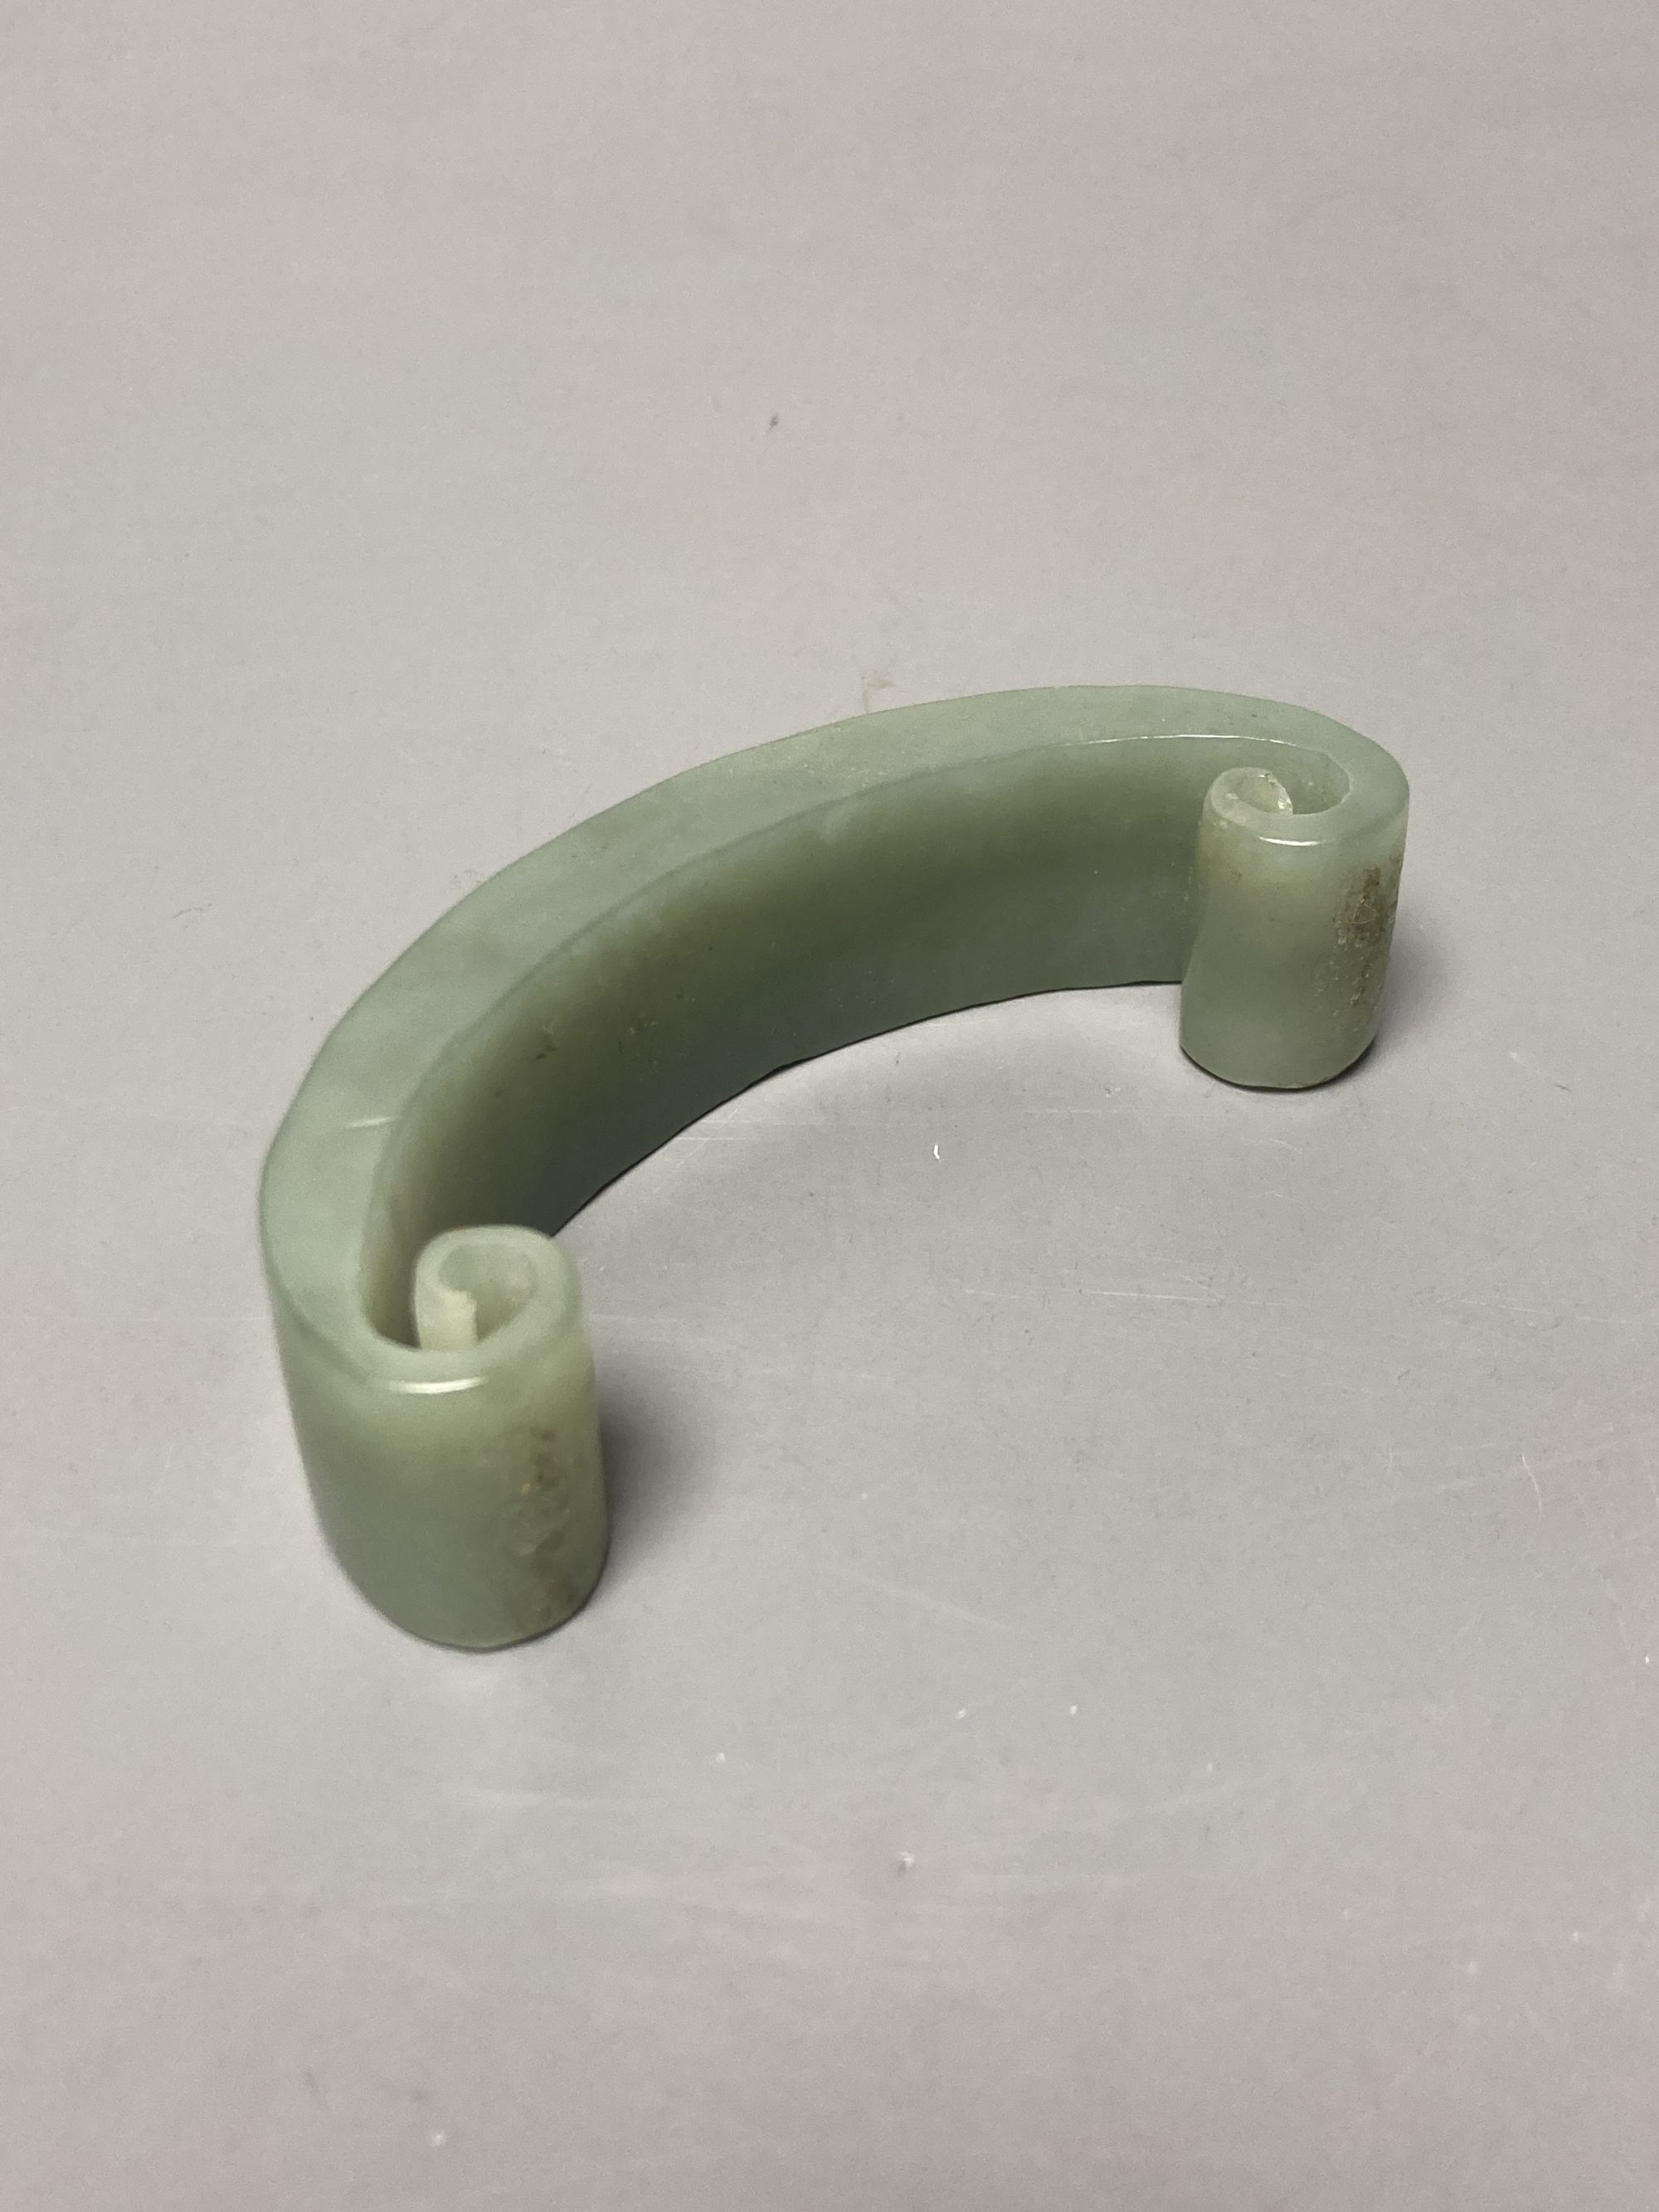 A Japanese bamboo wrist wrest, a Chinese jadeite, bamboo scoop and wooden carving possibly Zitan, - Image 3 of 5